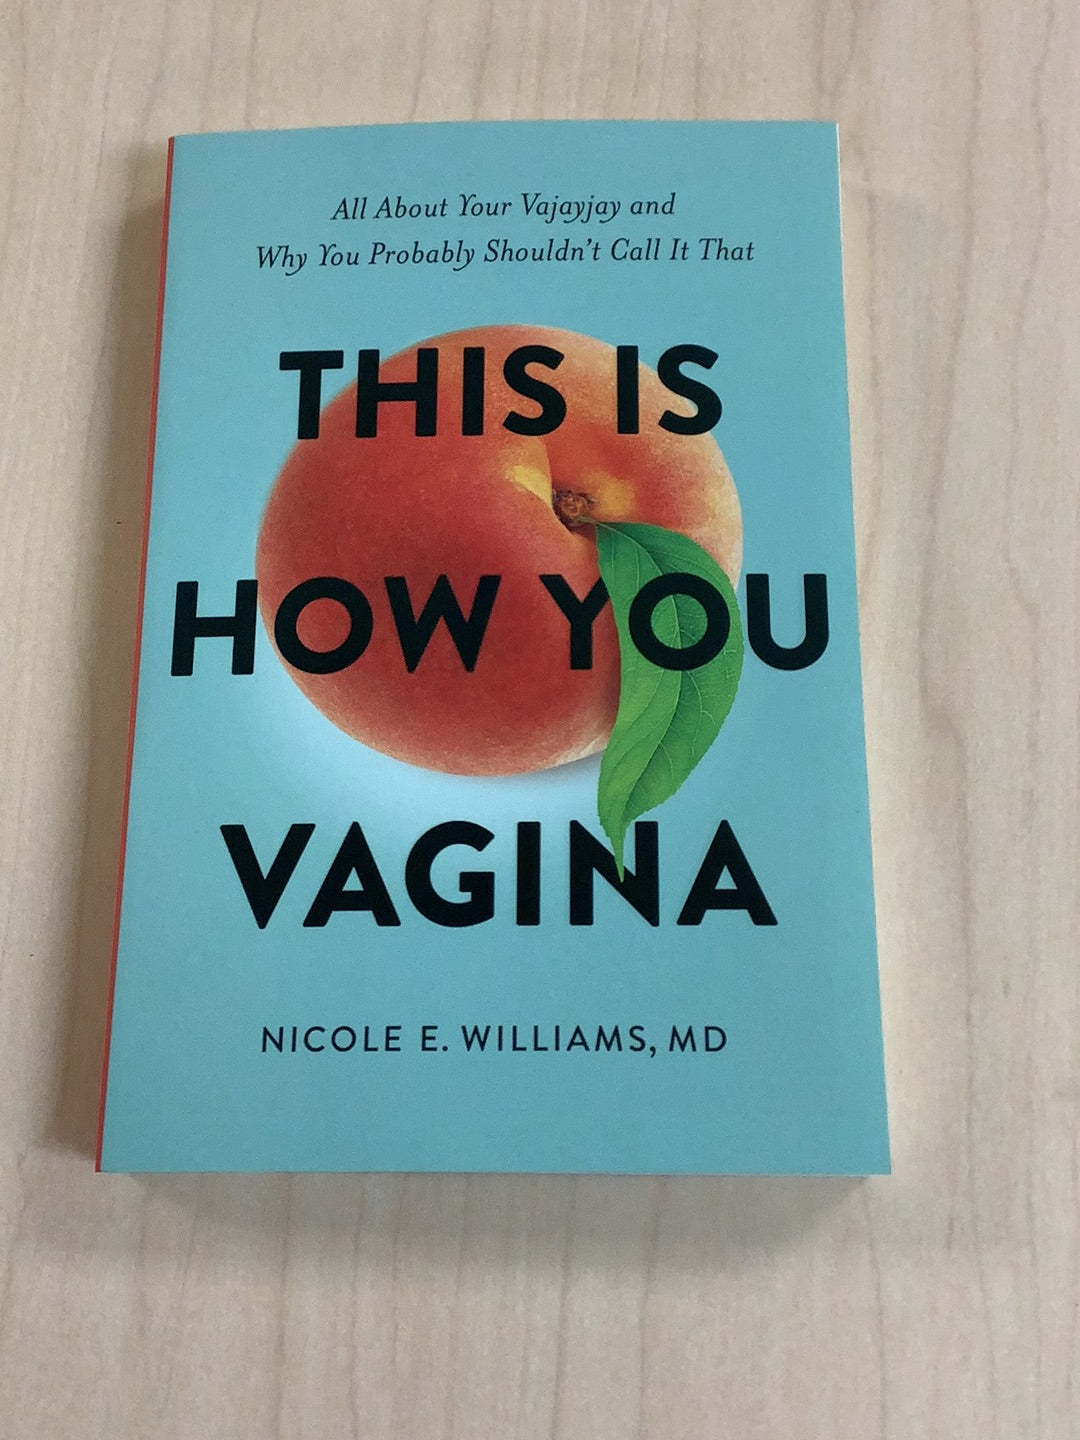 This is How You Vagina: All About Your Vajayjay and Why You Probably Shouldn't Call it That